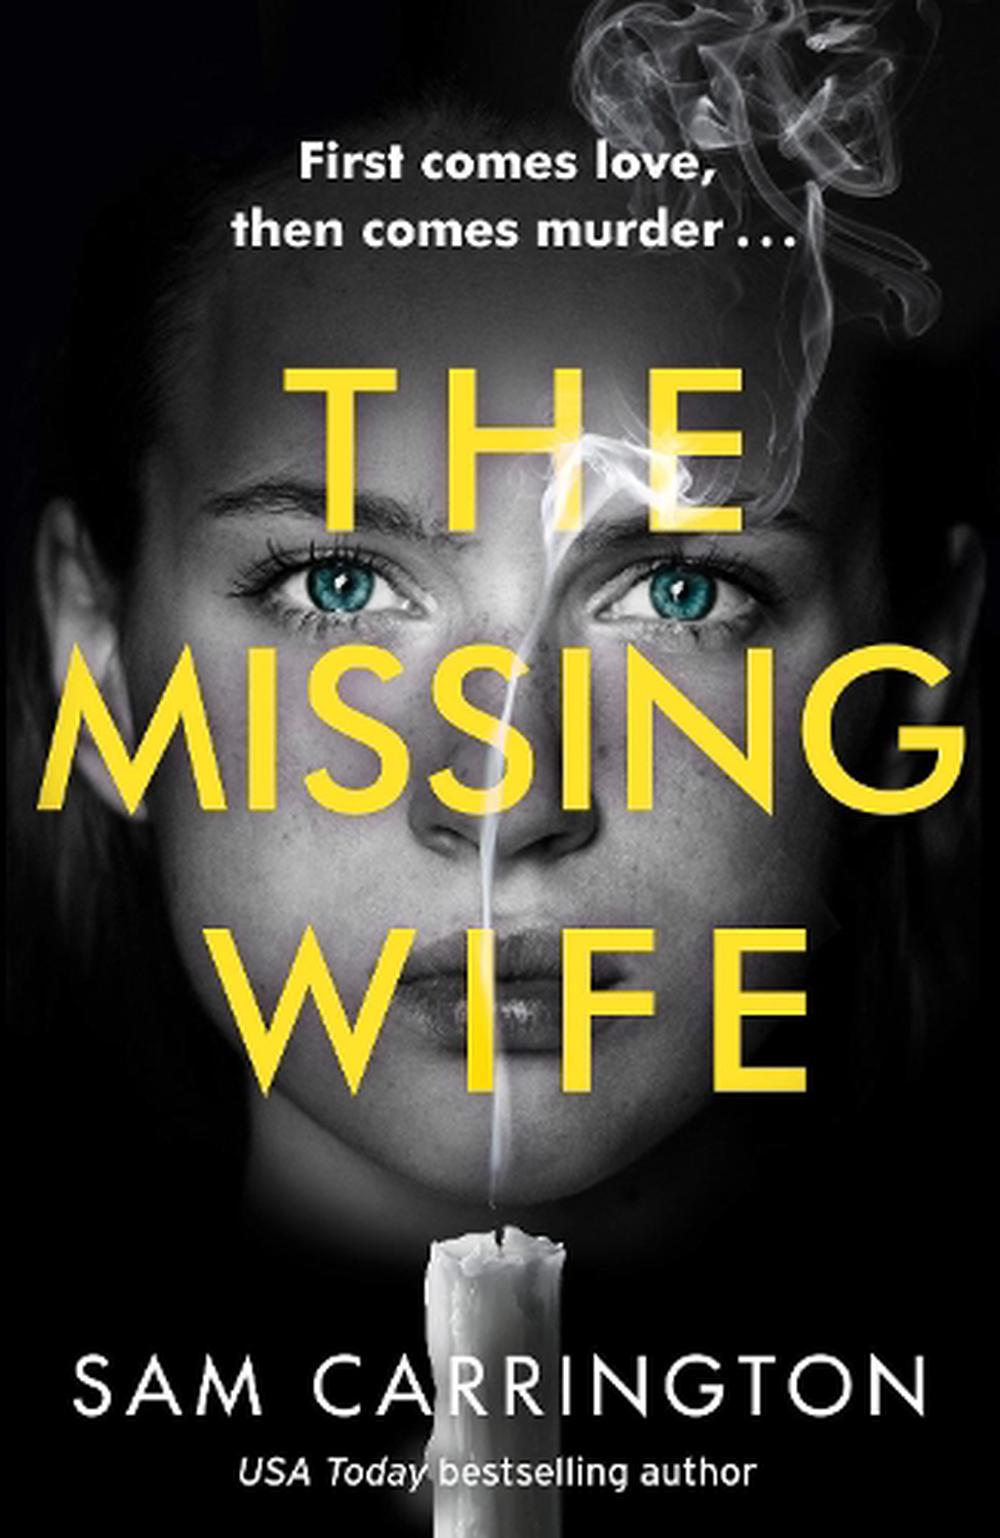 Missing Wife by Sam Carrington (English) Paperback Book Free Shipping